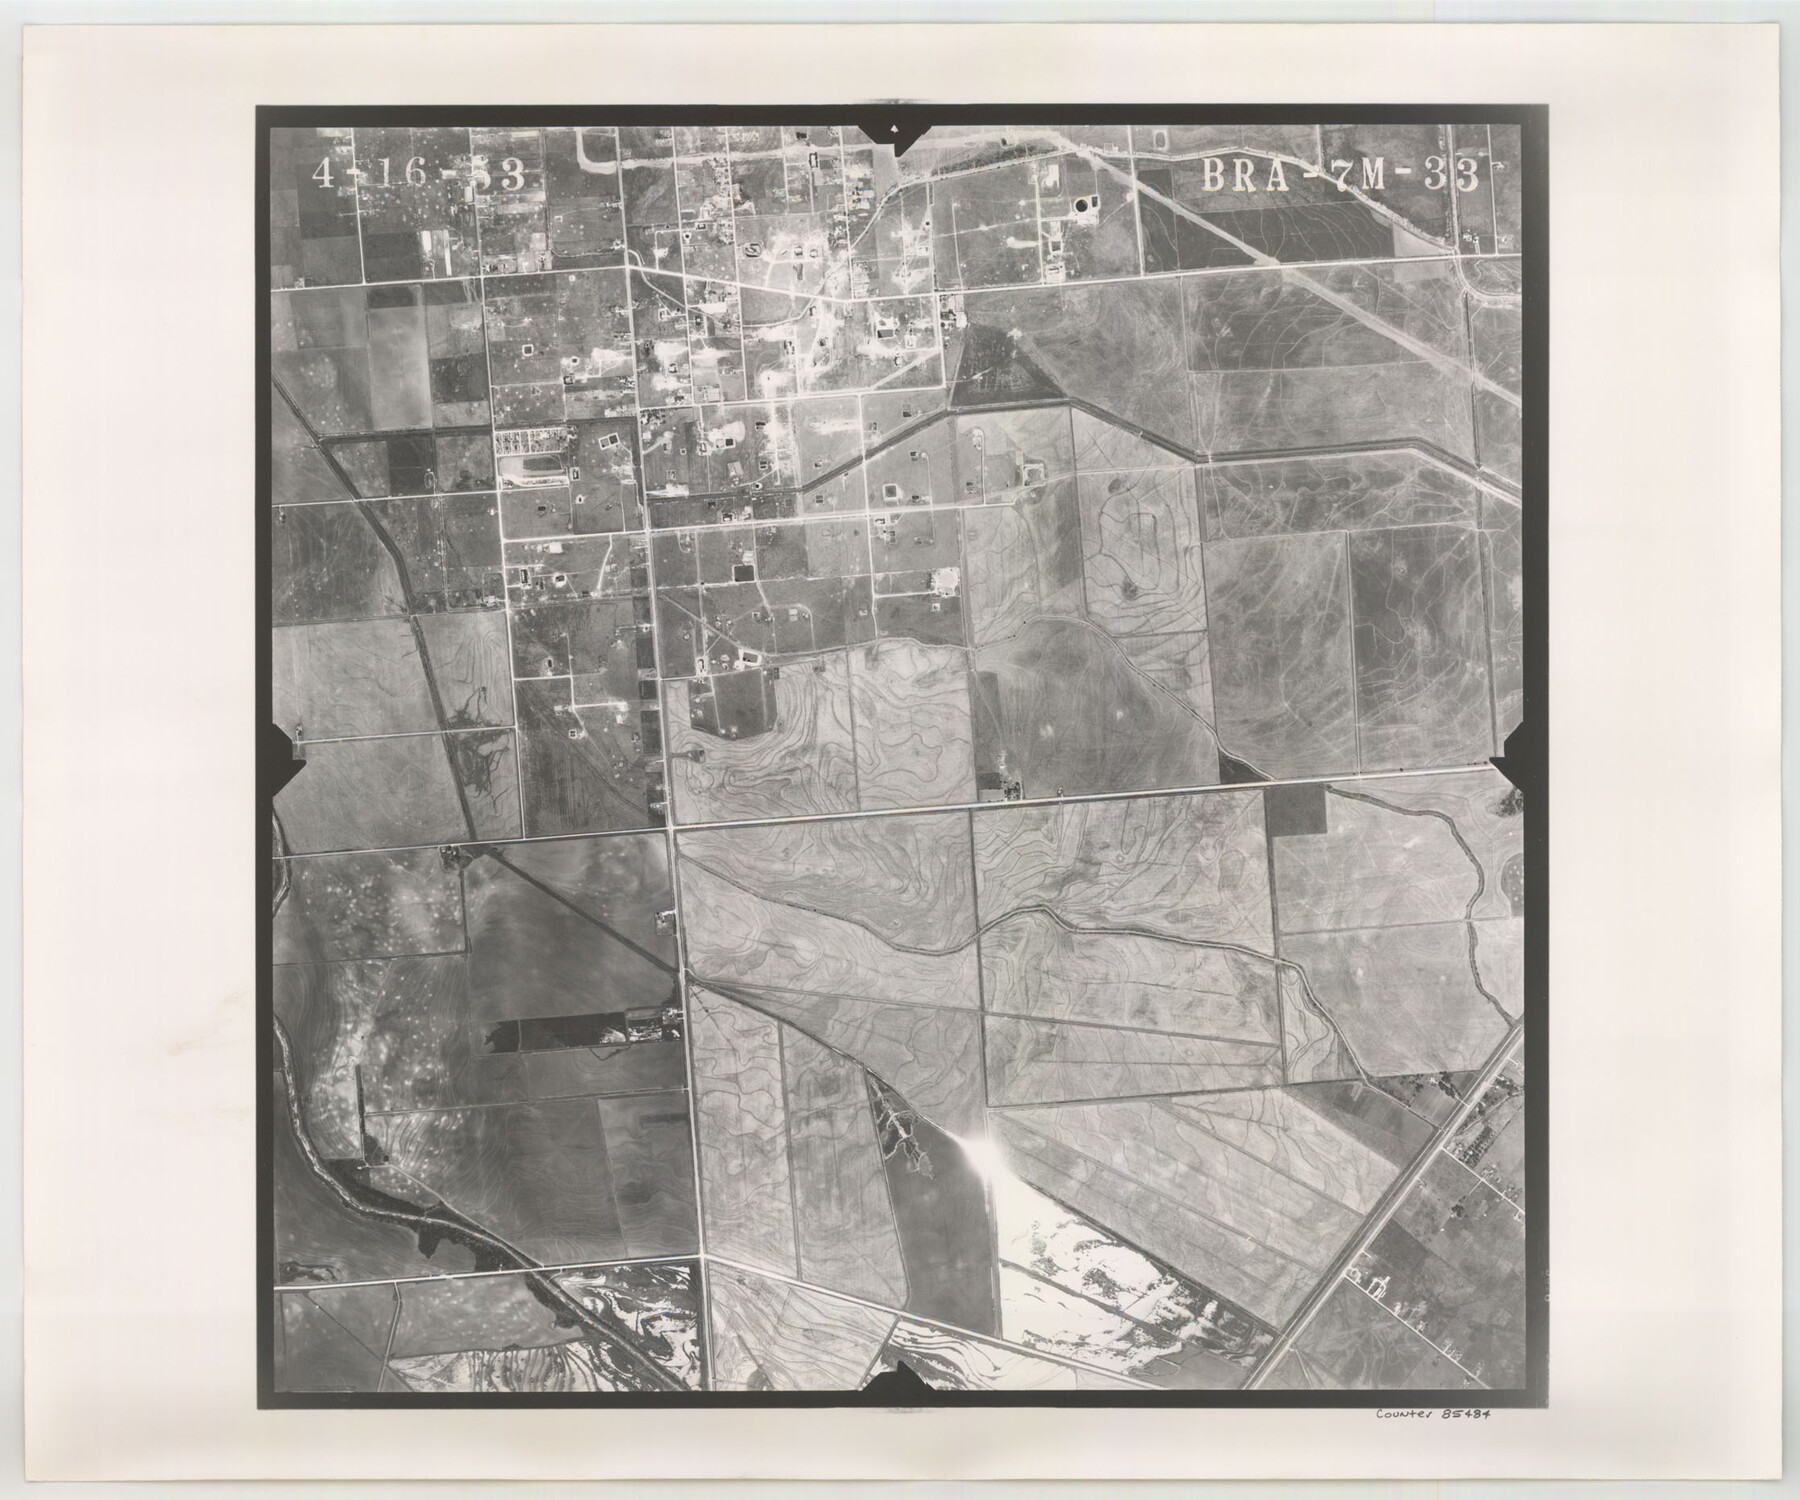 85484, Flight Mission No. BRA-7M, Frame 33, Jefferson County, General Map Collection